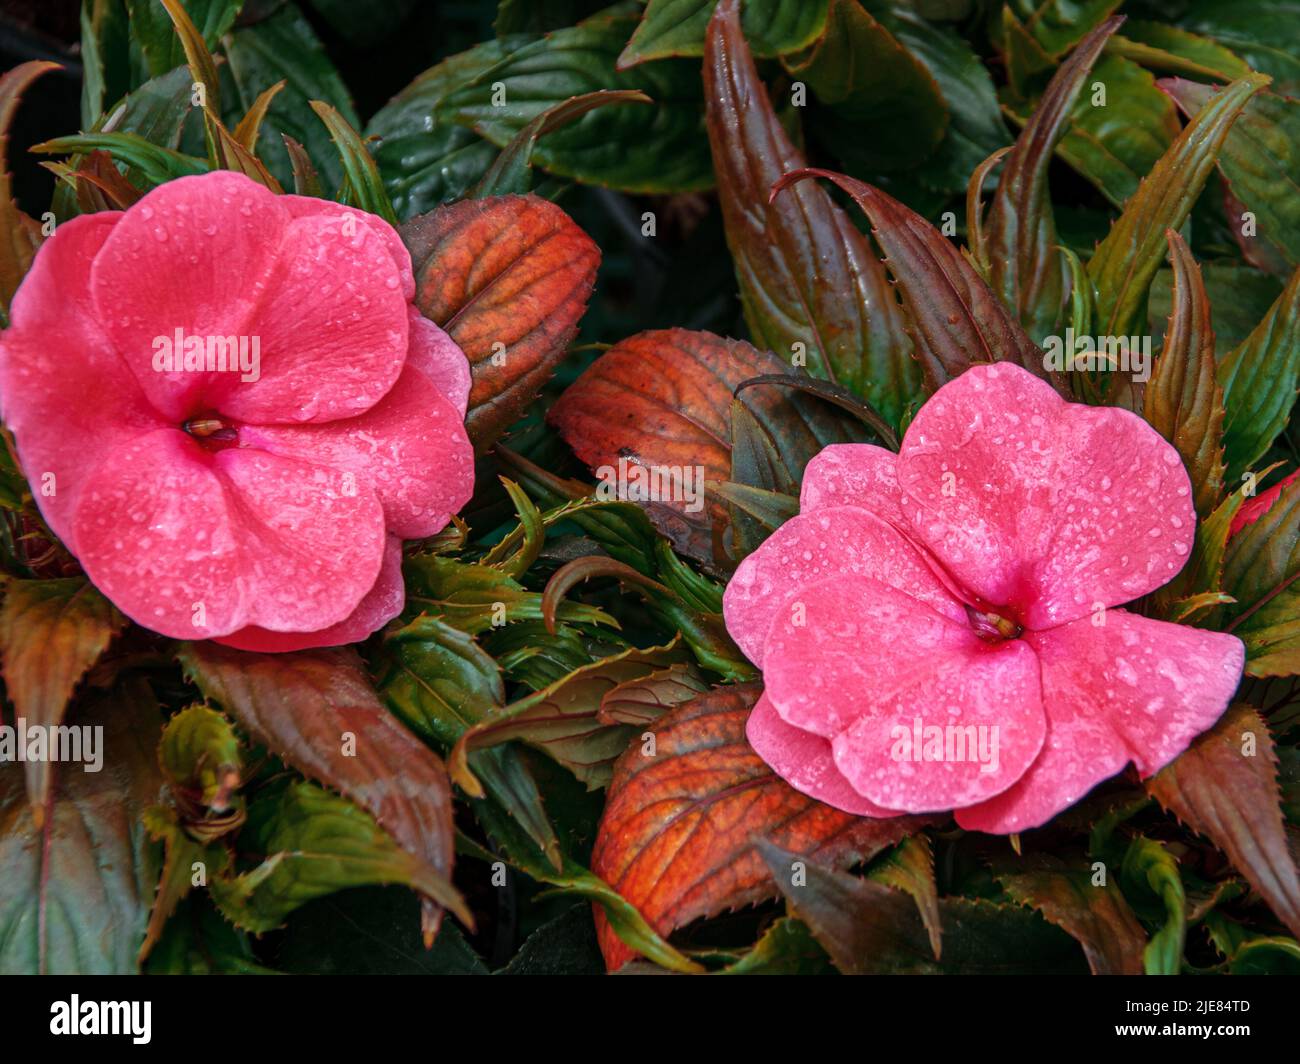 Impatiens balsamina balsam, garden balsam, rose balsam, touch me not, spotted snapweed with a natural background. Stock Photo